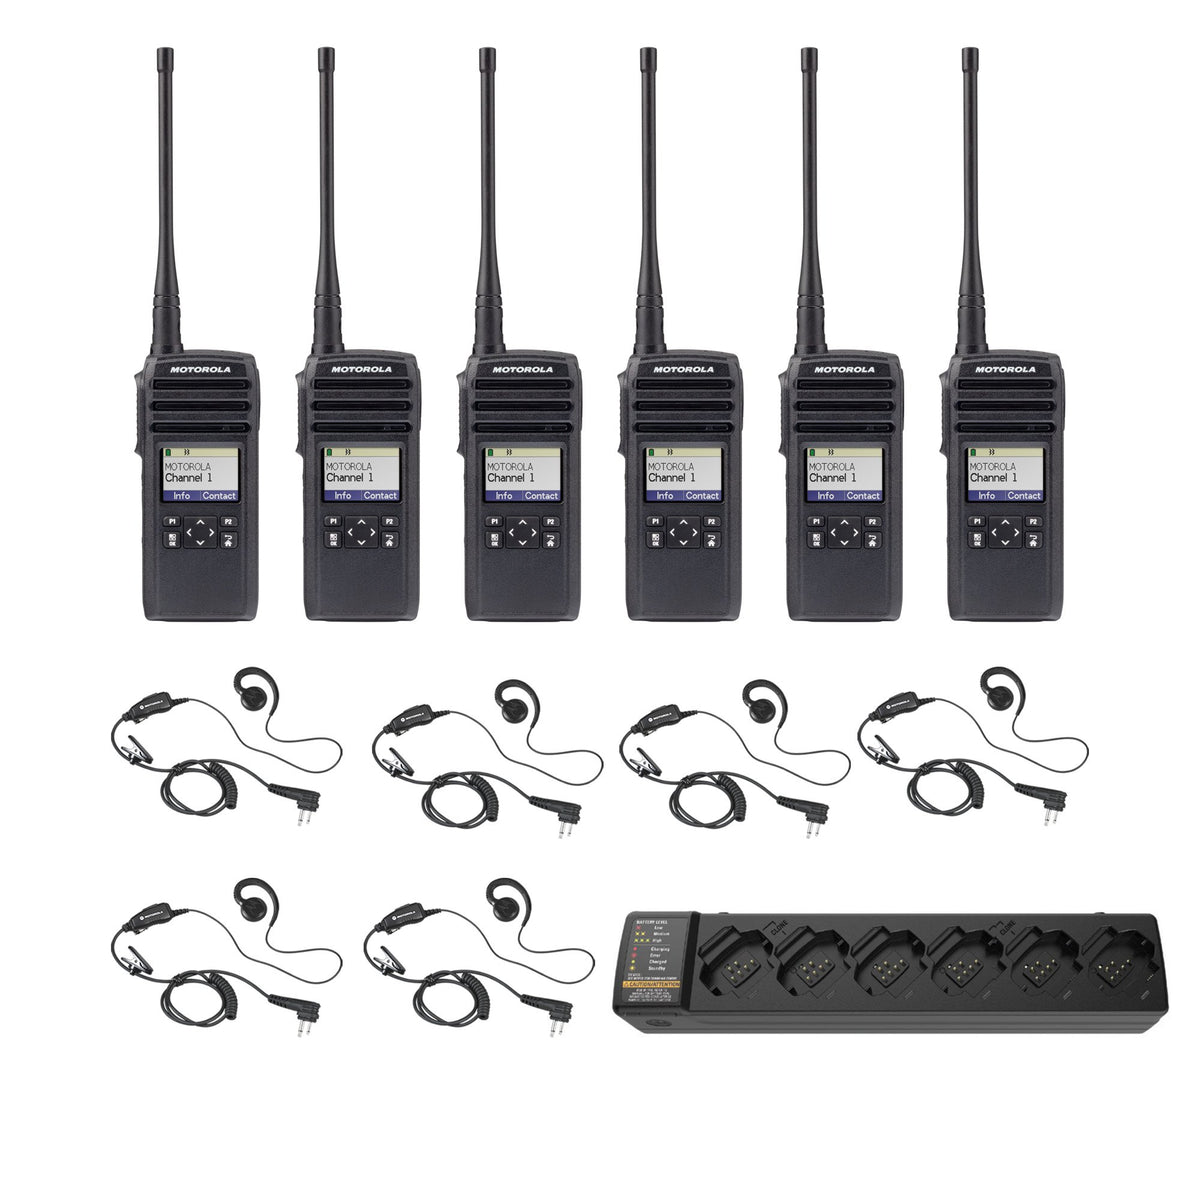 Motorola DTR700 6 Pack Bundle with Multi-Unit Charger and Headsets